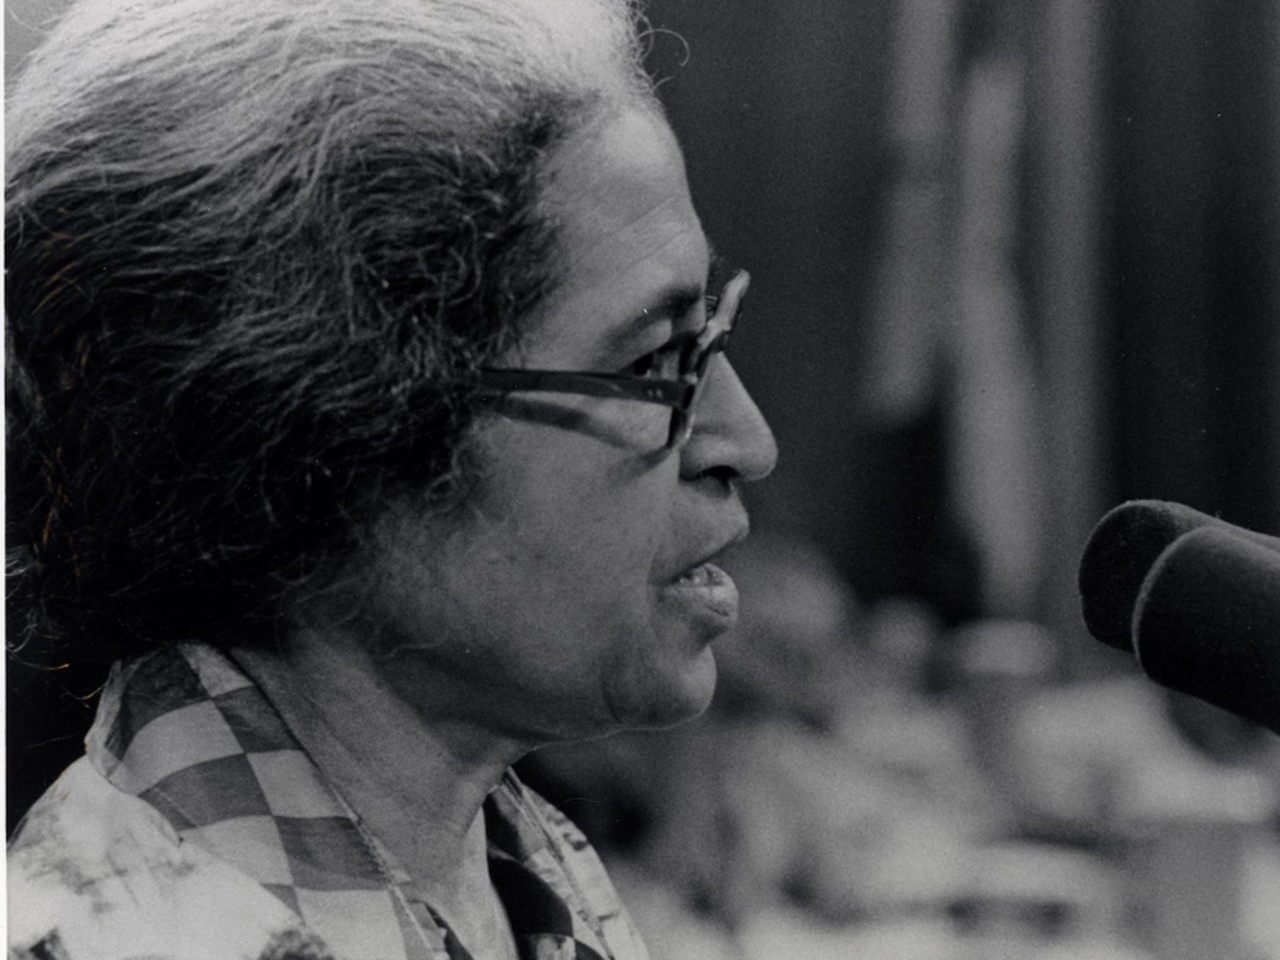 Rosa Parks speaking at a microphone